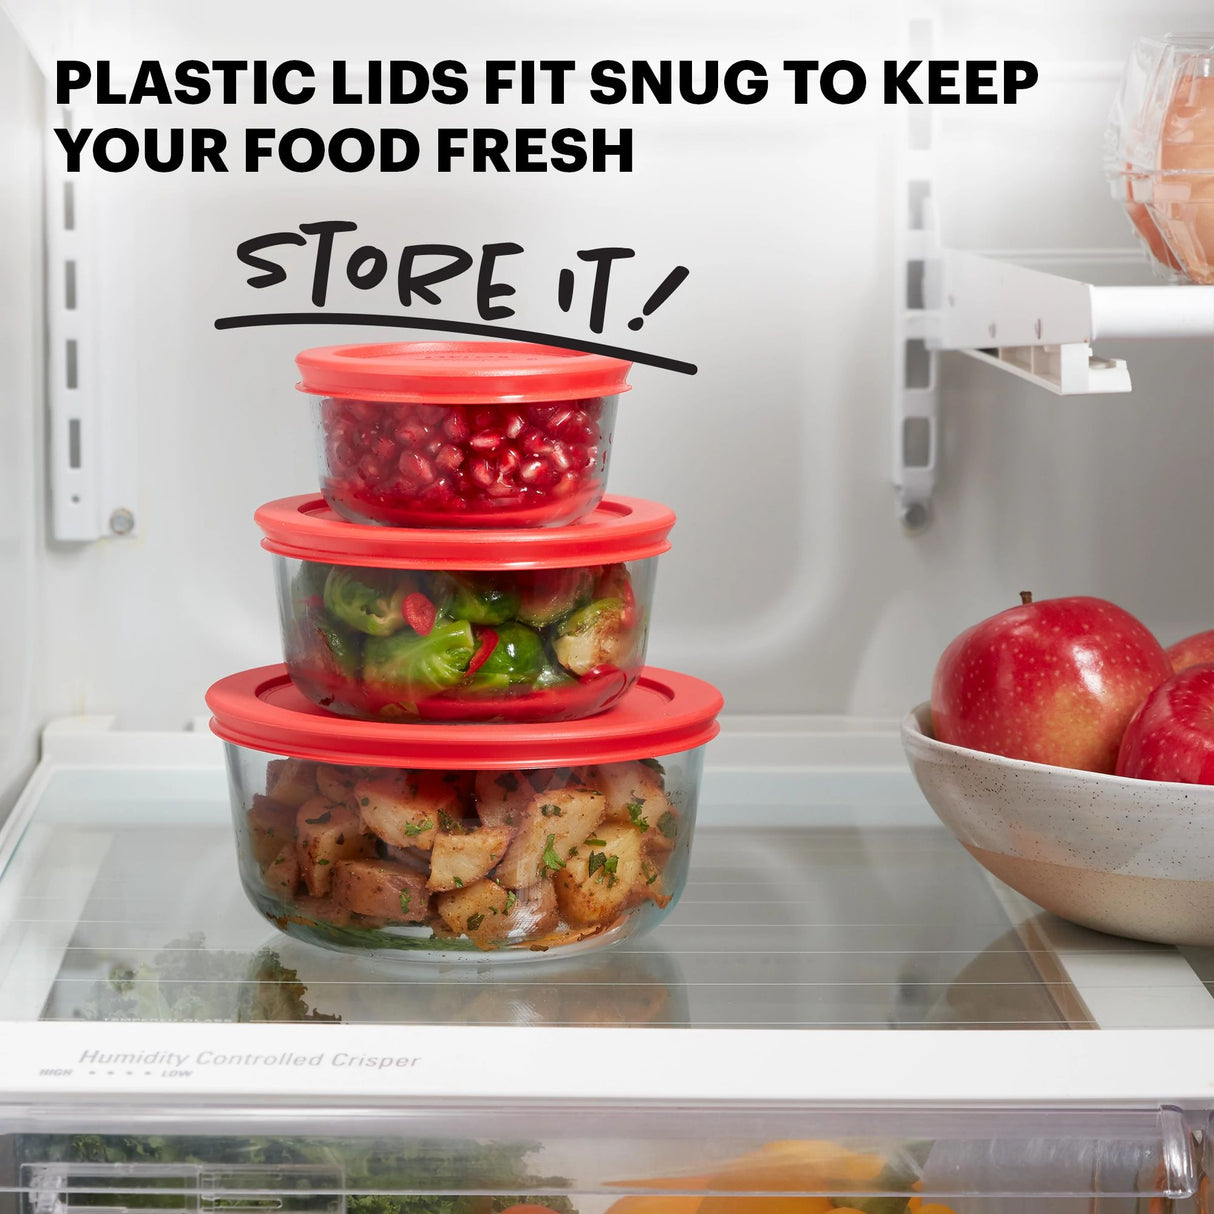  Simply Store® 6-piece Round Glass Storage Set with text Plastic lids fit snug to keep your food fresh, store it. 